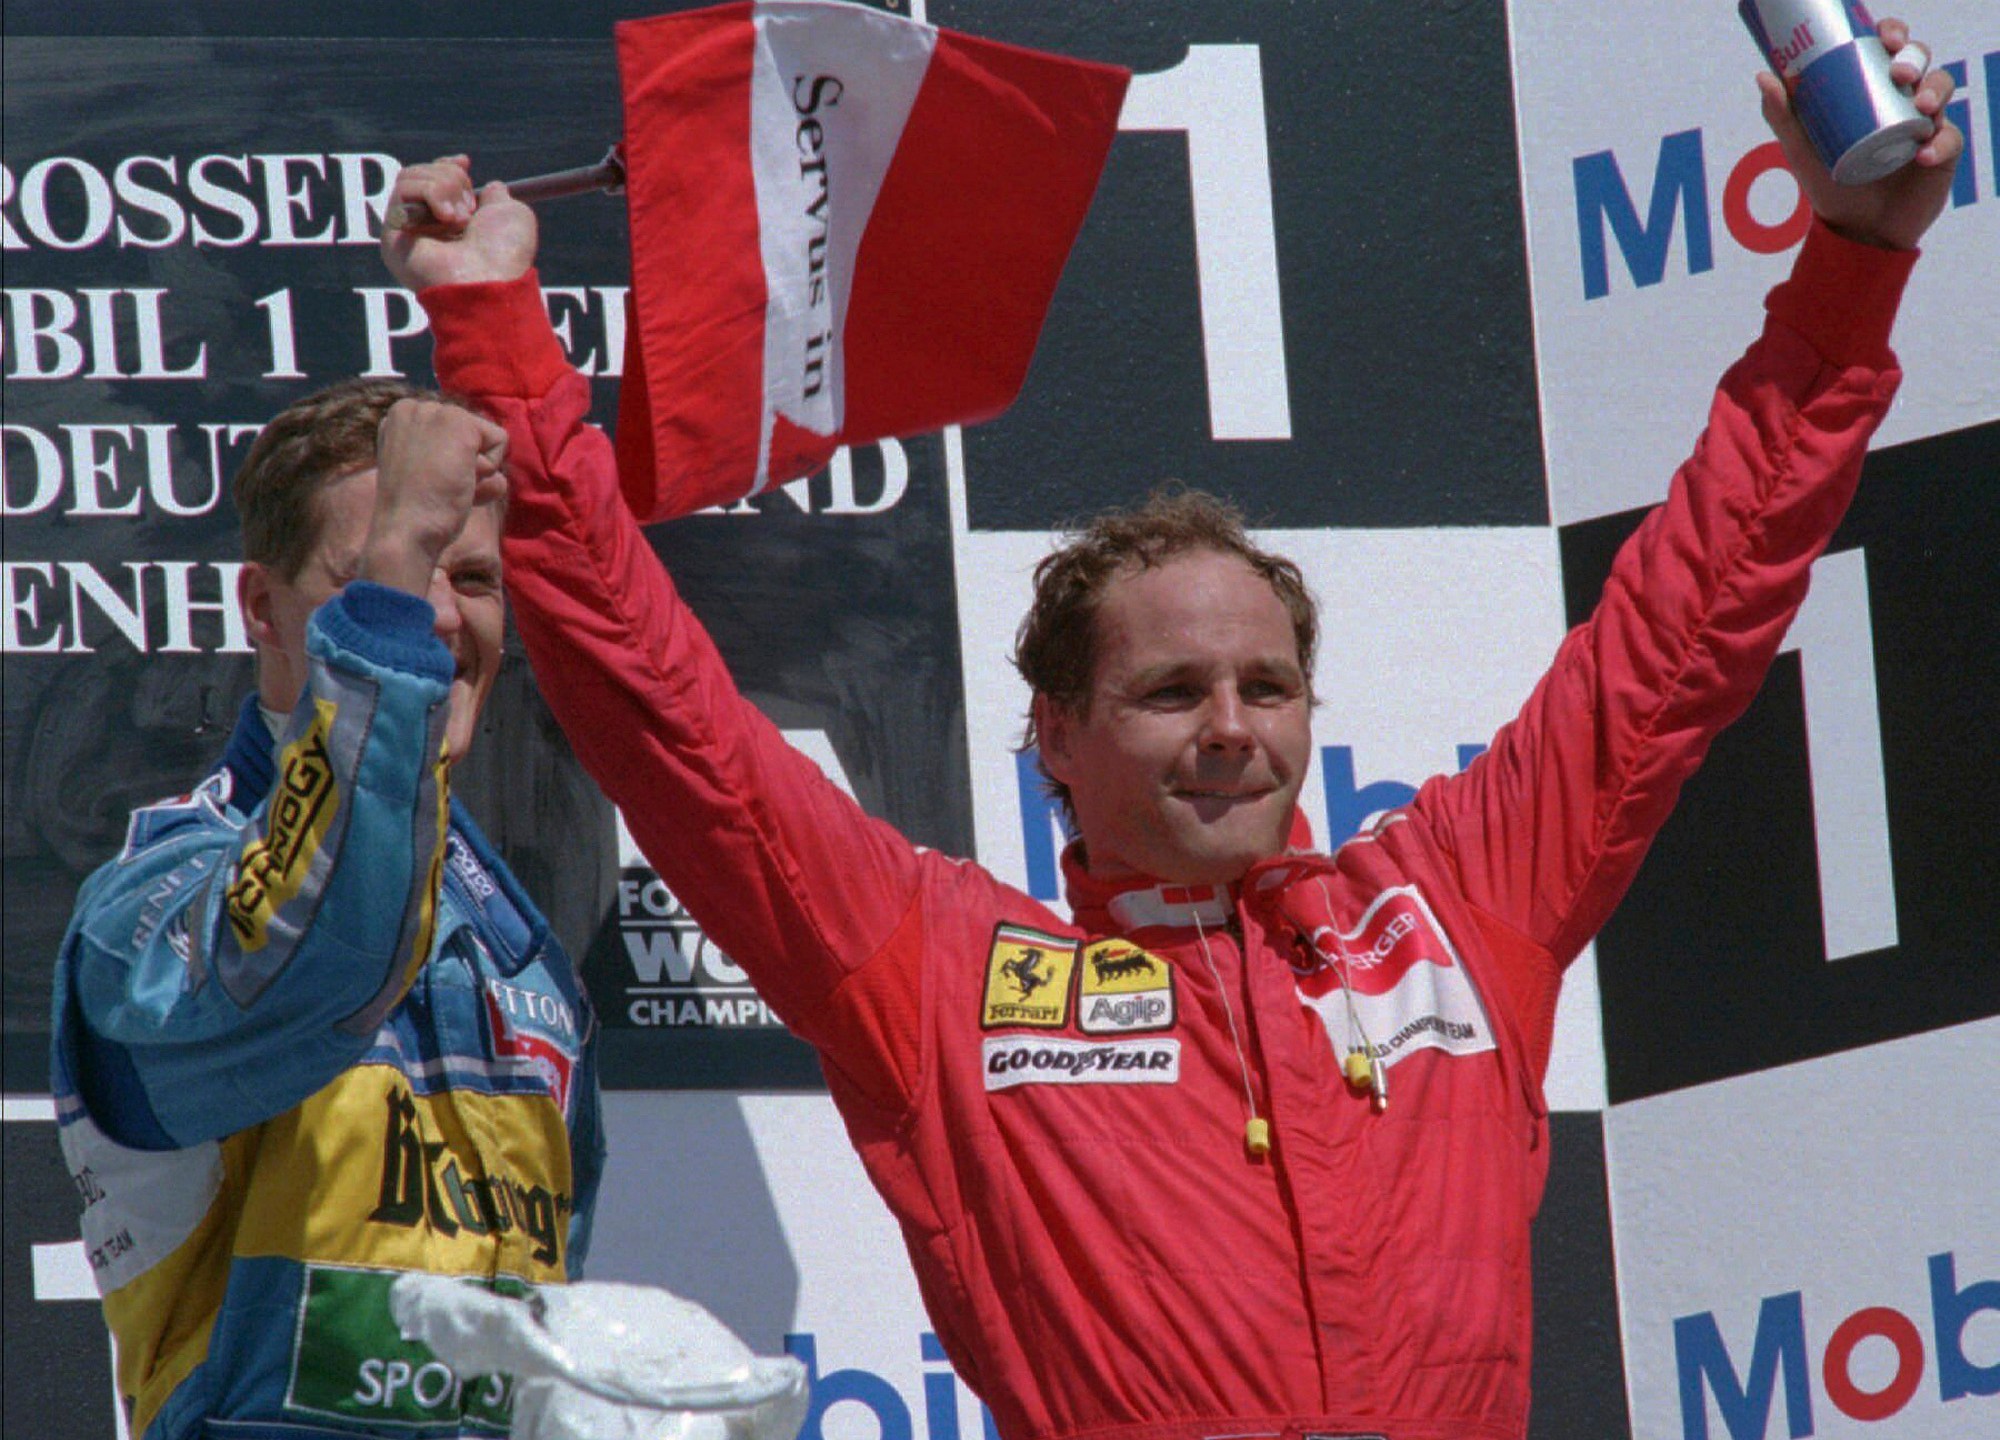 FILE - Michael Schumacher, the German winner of the German F1 Grand Prix, left, celebrates on the podium with third-placed Gerhard Berger of Austria, waving his national flag in Hockenheim, Germany, Sunday July 30, 1995. British police said Monday, March 4, 2024, that they have recovered a Ferrari stolen from Formula One driver Gerhard Berger in Italy almost three decades ago. The red Ferrari F512M was one of two sports cars taken while their drivers were in Imola, Italy for the San Marino Grand Prix in April 1995.(AP Photo/Roland Weihrauch, File)